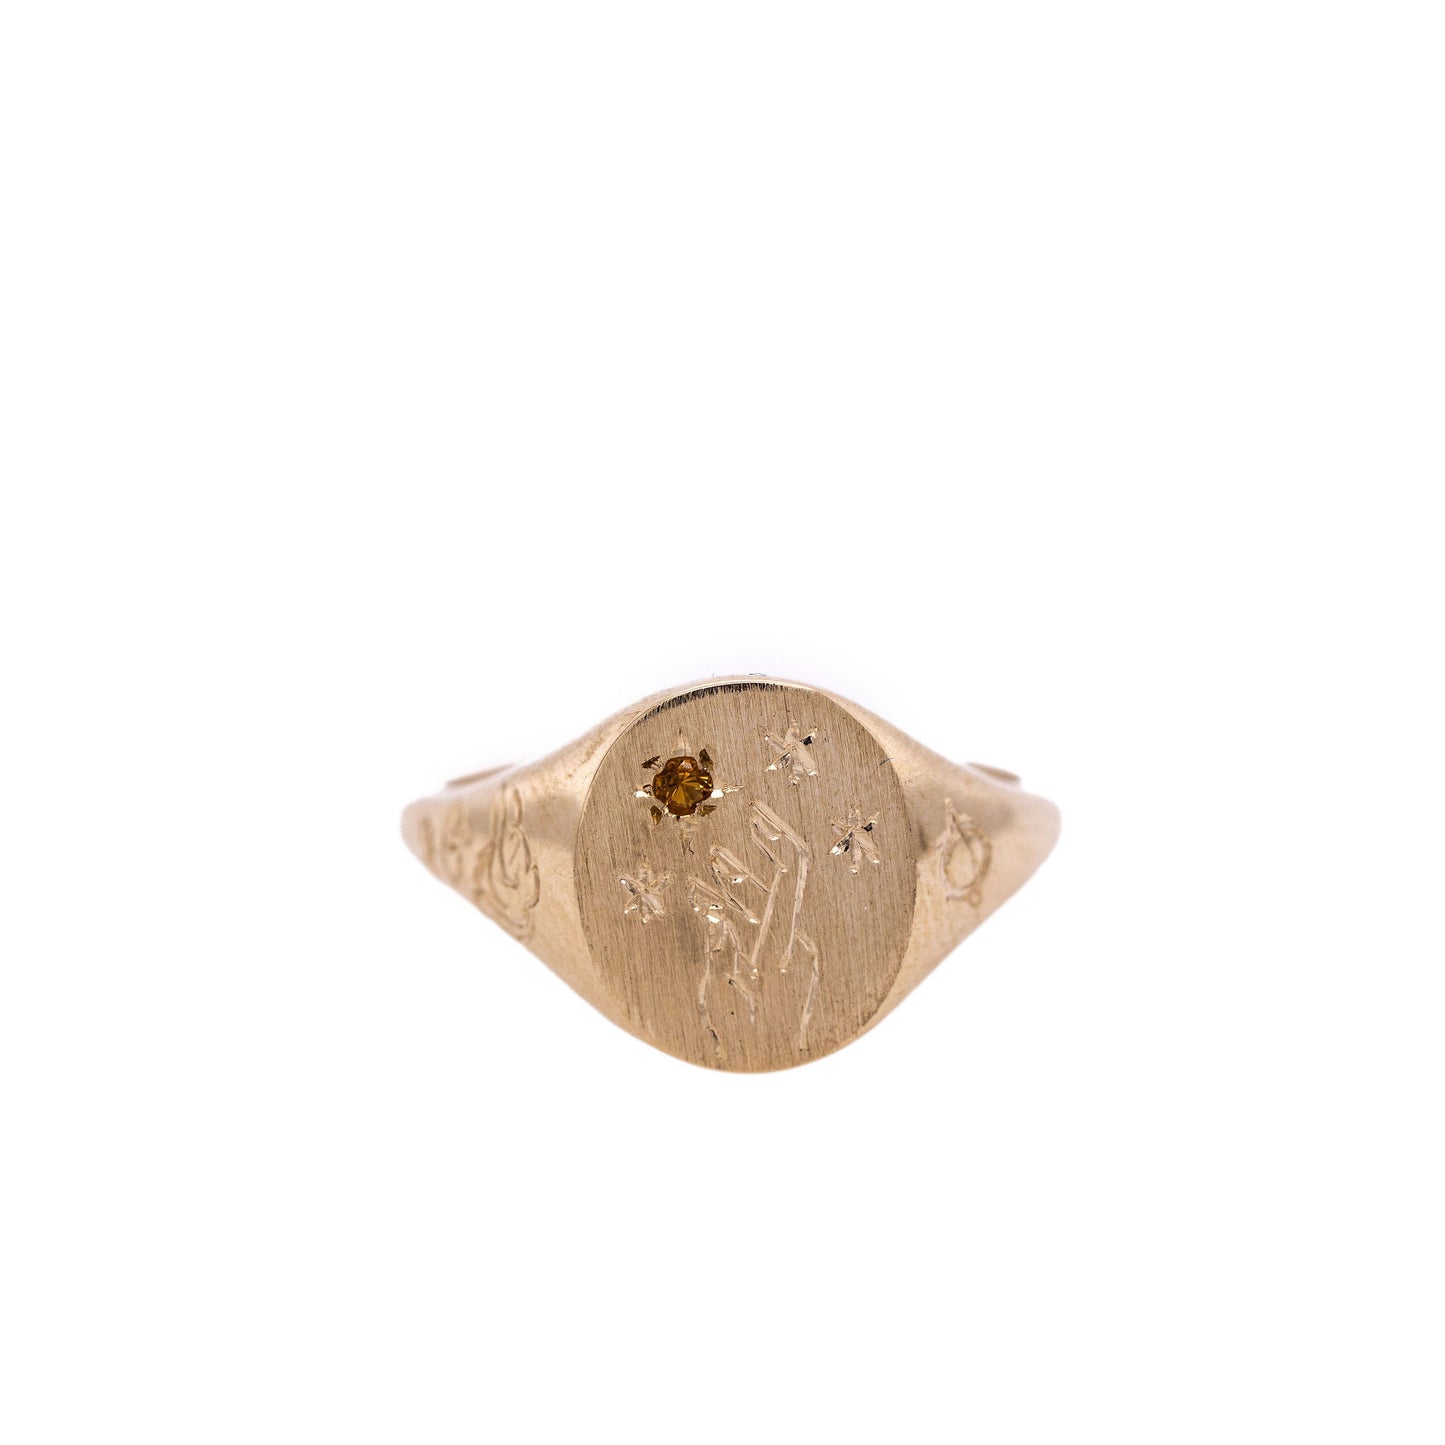 Citrine Hand-engraved gold signet ring with intricate design on a clean white background